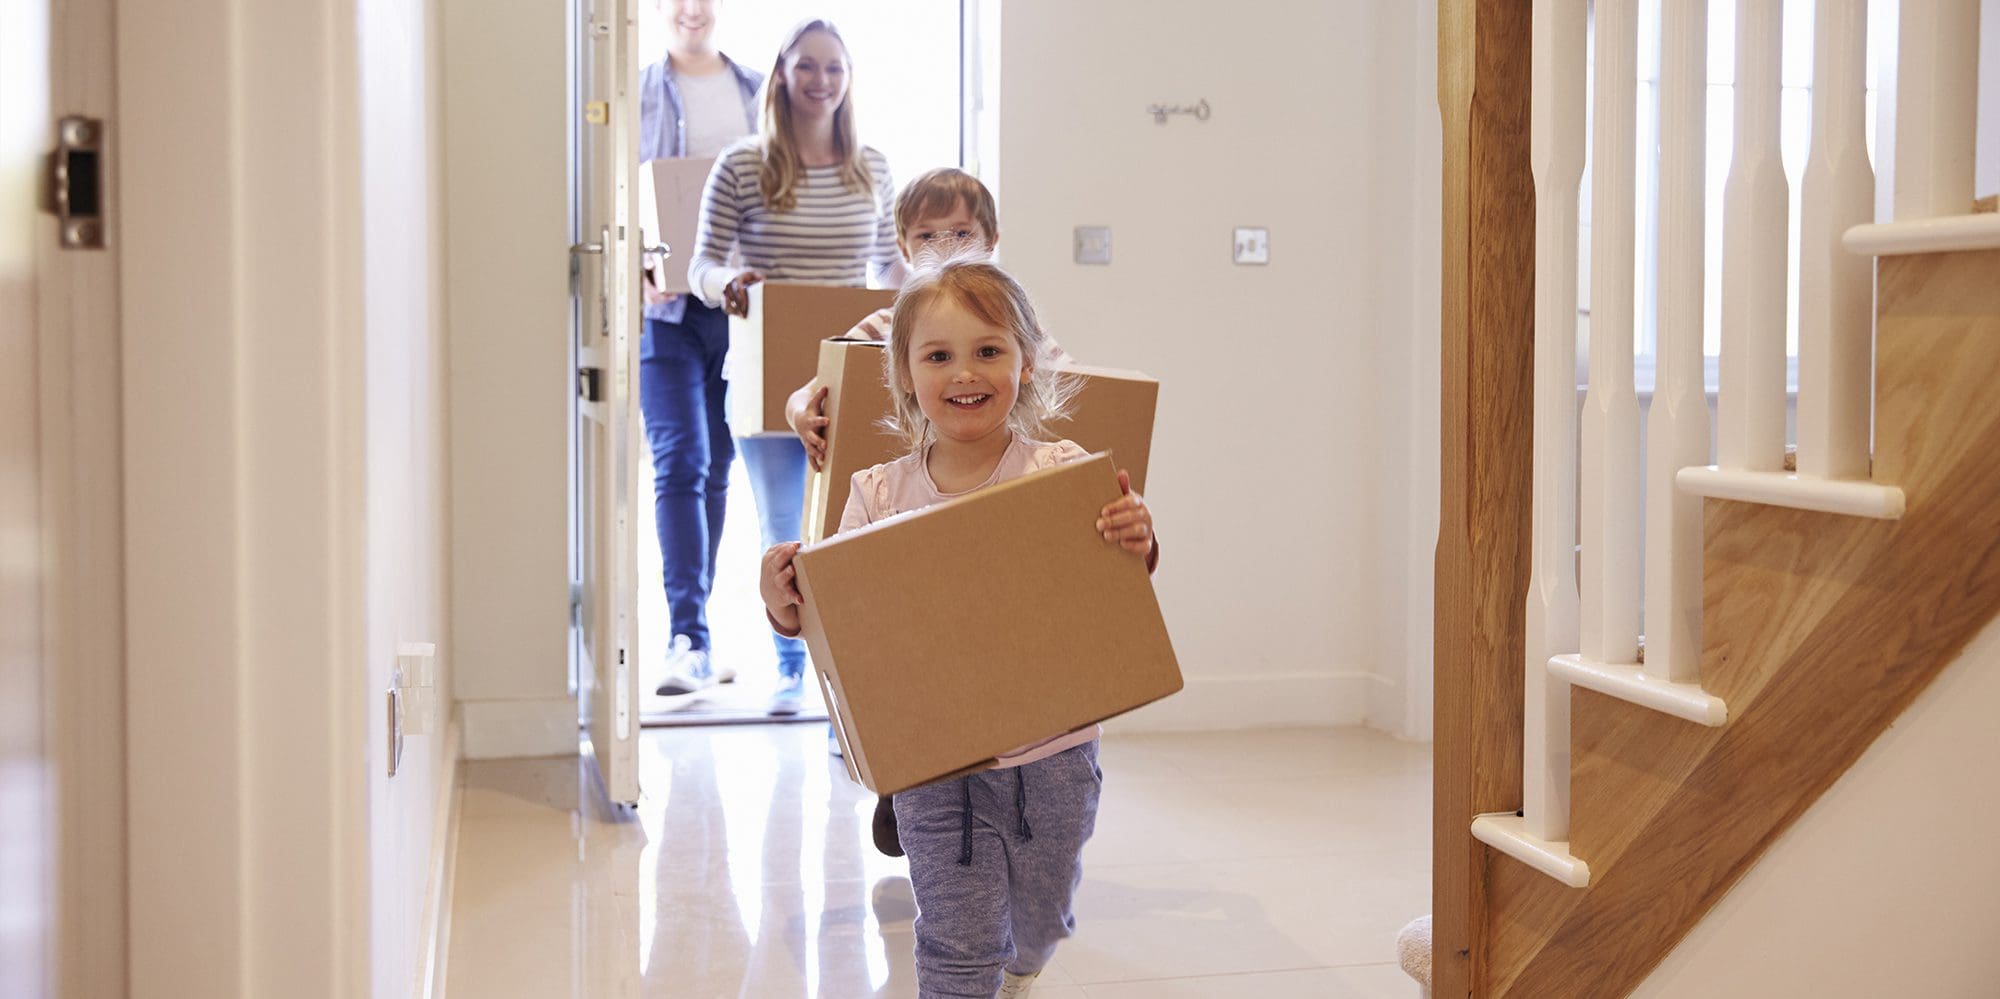 Young girl and boy carrying boxes into their new home